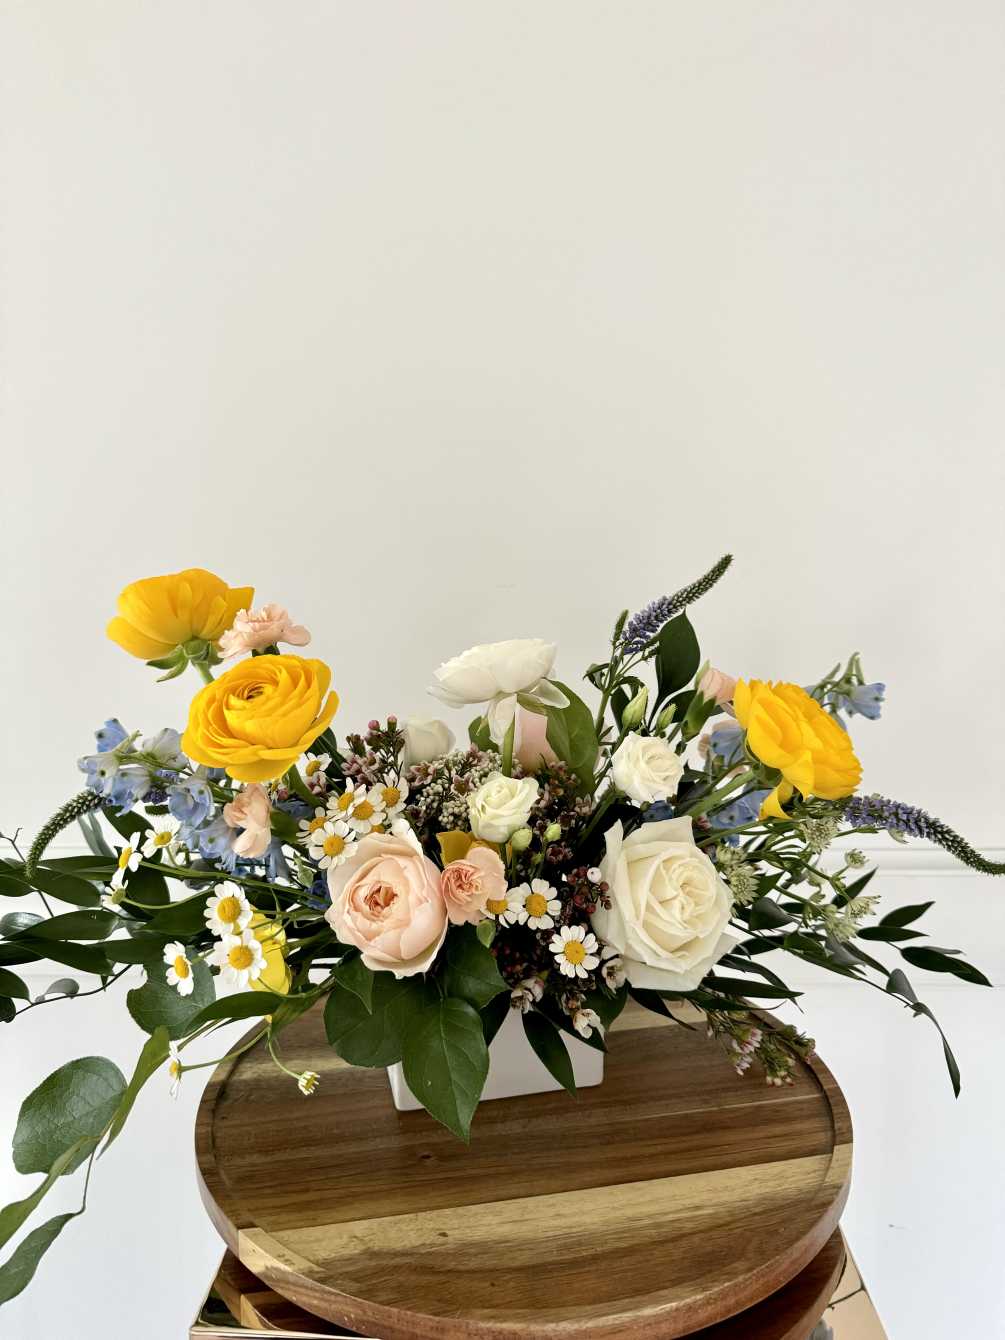 A beautiful and organic arrangement of neutrals with pops of blue and